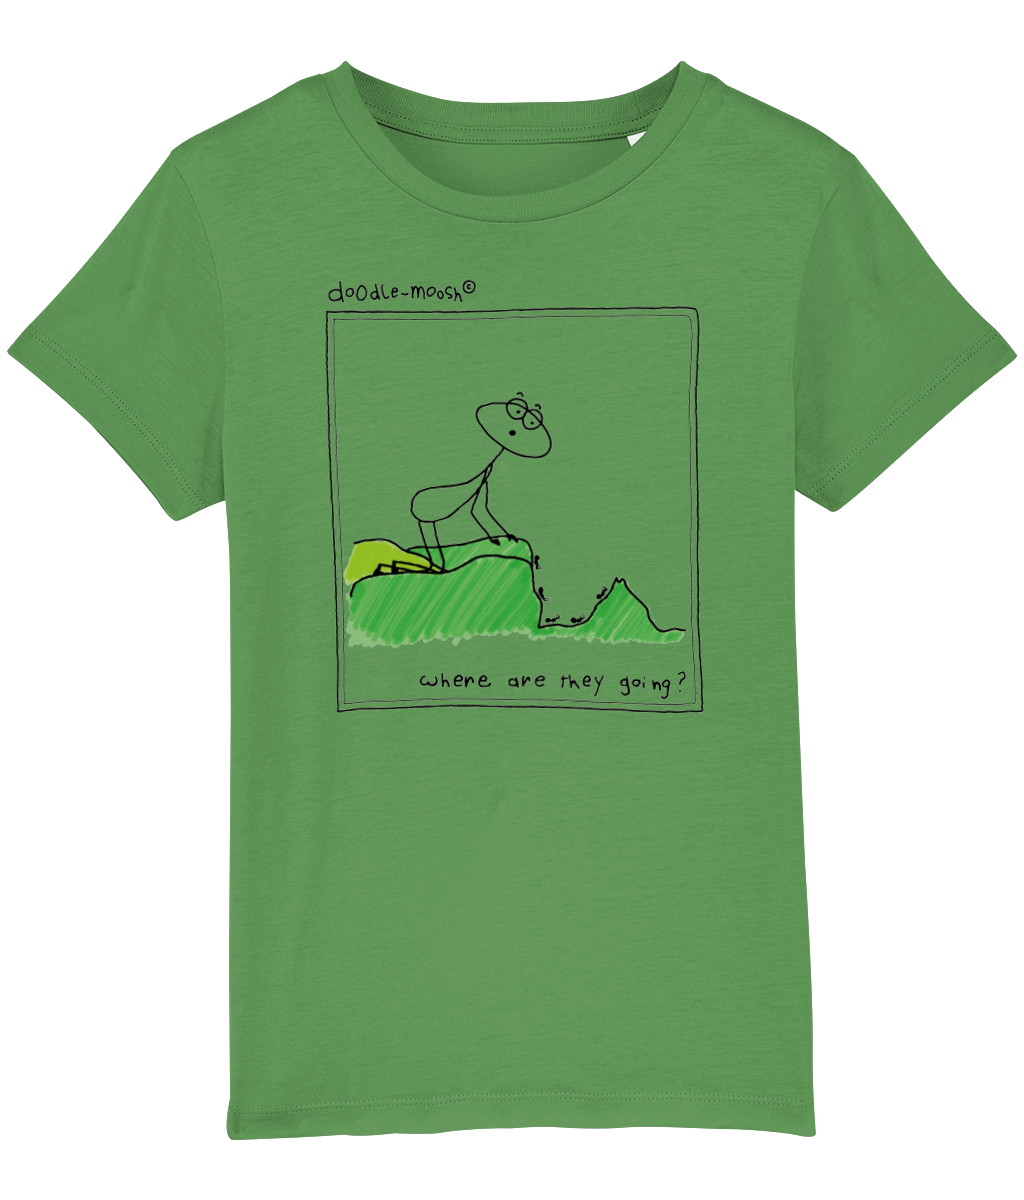 Where are they going t-shirt, green with black, colourful drawing